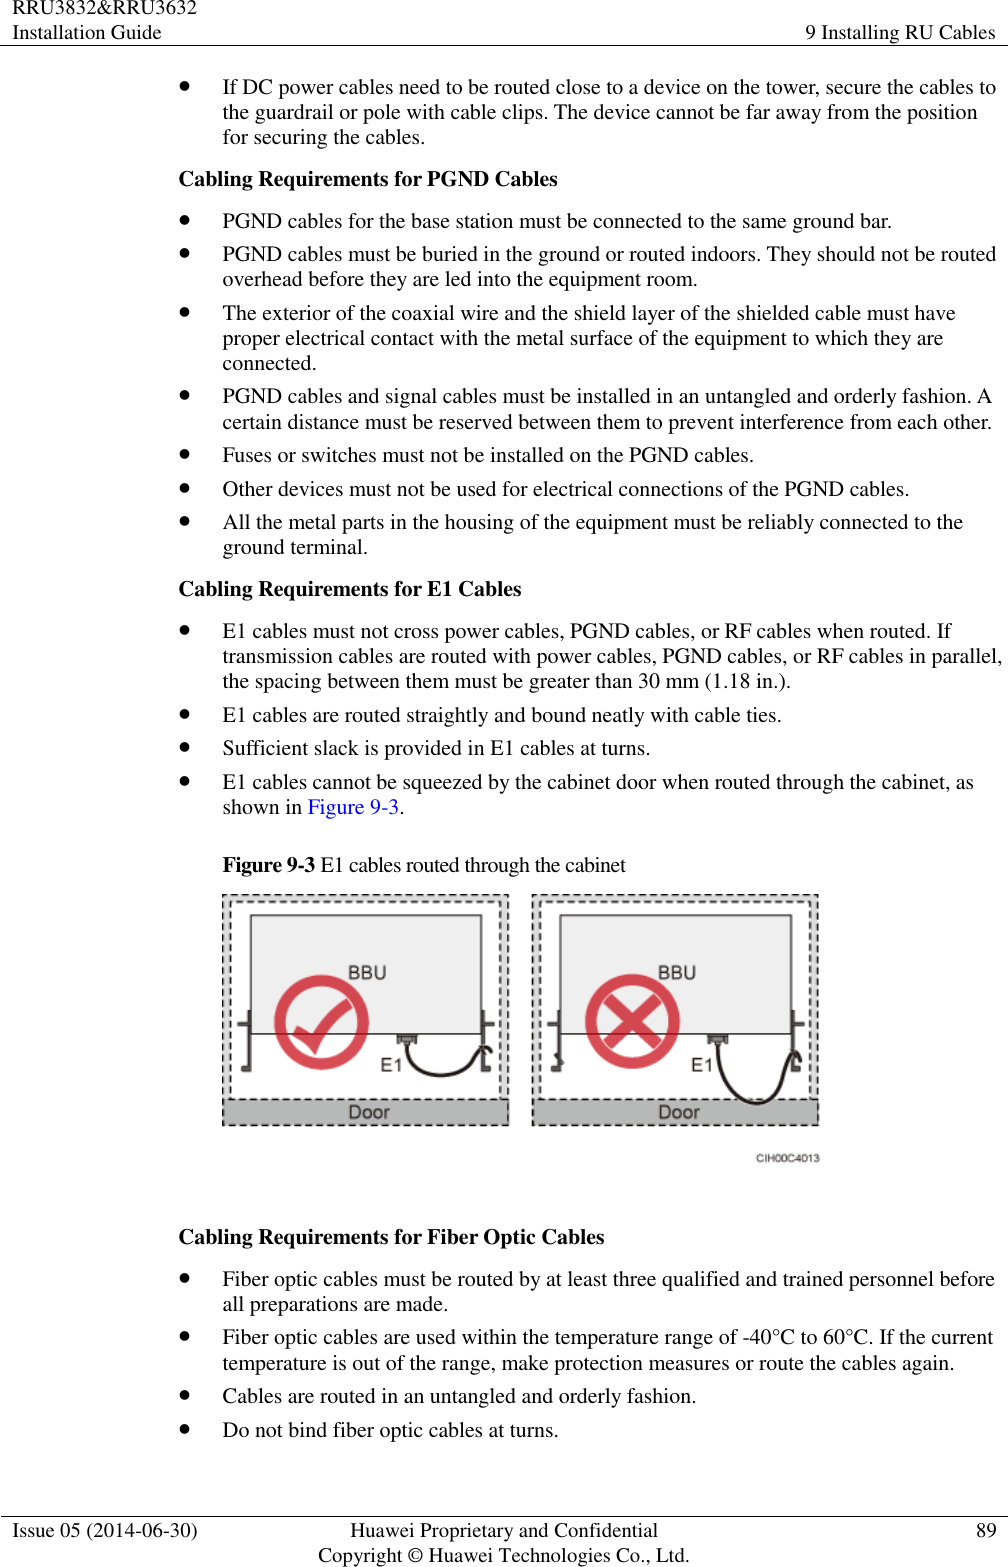 RRU3832&amp;RRU3632 Installation Guide 9 Installing RU Cables  Issue 05 (2014-06-30) Huawei Proprietary and Confidential                                     Copyright © Huawei Technologies Co., Ltd. 89   If DC power cables need to be routed close to a device on the tower, secure the cables to the guardrail or pole with cable clips. The device cannot be far away from the position for securing the cables. Cabling Requirements for PGND Cables  PGND cables for the base station must be connected to the same ground bar.  PGND cables must be buried in the ground or routed indoors. They should not be routed overhead before they are led into the equipment room.  The exterior of the coaxial wire and the shield layer of the shielded cable must have proper electrical contact with the metal surface of the equipment to which they are connected.  PGND cables and signal cables must be installed in an untangled and orderly fashion. A certain distance must be reserved between them to prevent interference from each other.  Fuses or switches must not be installed on the PGND cables.  Other devices must not be used for electrical connections of the PGND cables.  All the metal parts in the housing of the equipment must be reliably connected to the ground terminal. Cabling Requirements for E1 Cables  E1 cables must not cross power cables, PGND cables, or RF cables when routed. If transmission cables are routed with power cables, PGND cables, or RF cables in parallel, the spacing between them must be greater than 30 mm (1.18 in.).  E1 cables are routed straightly and bound neatly with cable ties.  Sufficient slack is provided in E1 cables at turns.  E1 cables cannot be squeezed by the cabinet door when routed through the cabinet, as shown in Figure 9-3. Figure 9-3 E1 cables routed through the cabinet   Cabling Requirements for Fiber Optic Cables  Fiber optic cables must be routed by at least three qualified and trained personnel before all preparations are made.  Fiber optic cables are used within the temperature range of -40°C to 60°C. If the current temperature is out of the range, make protection measures or route the cables again.  Cables are routed in an untangled and orderly fashion.  Do not bind fiber optic cables at turns. 